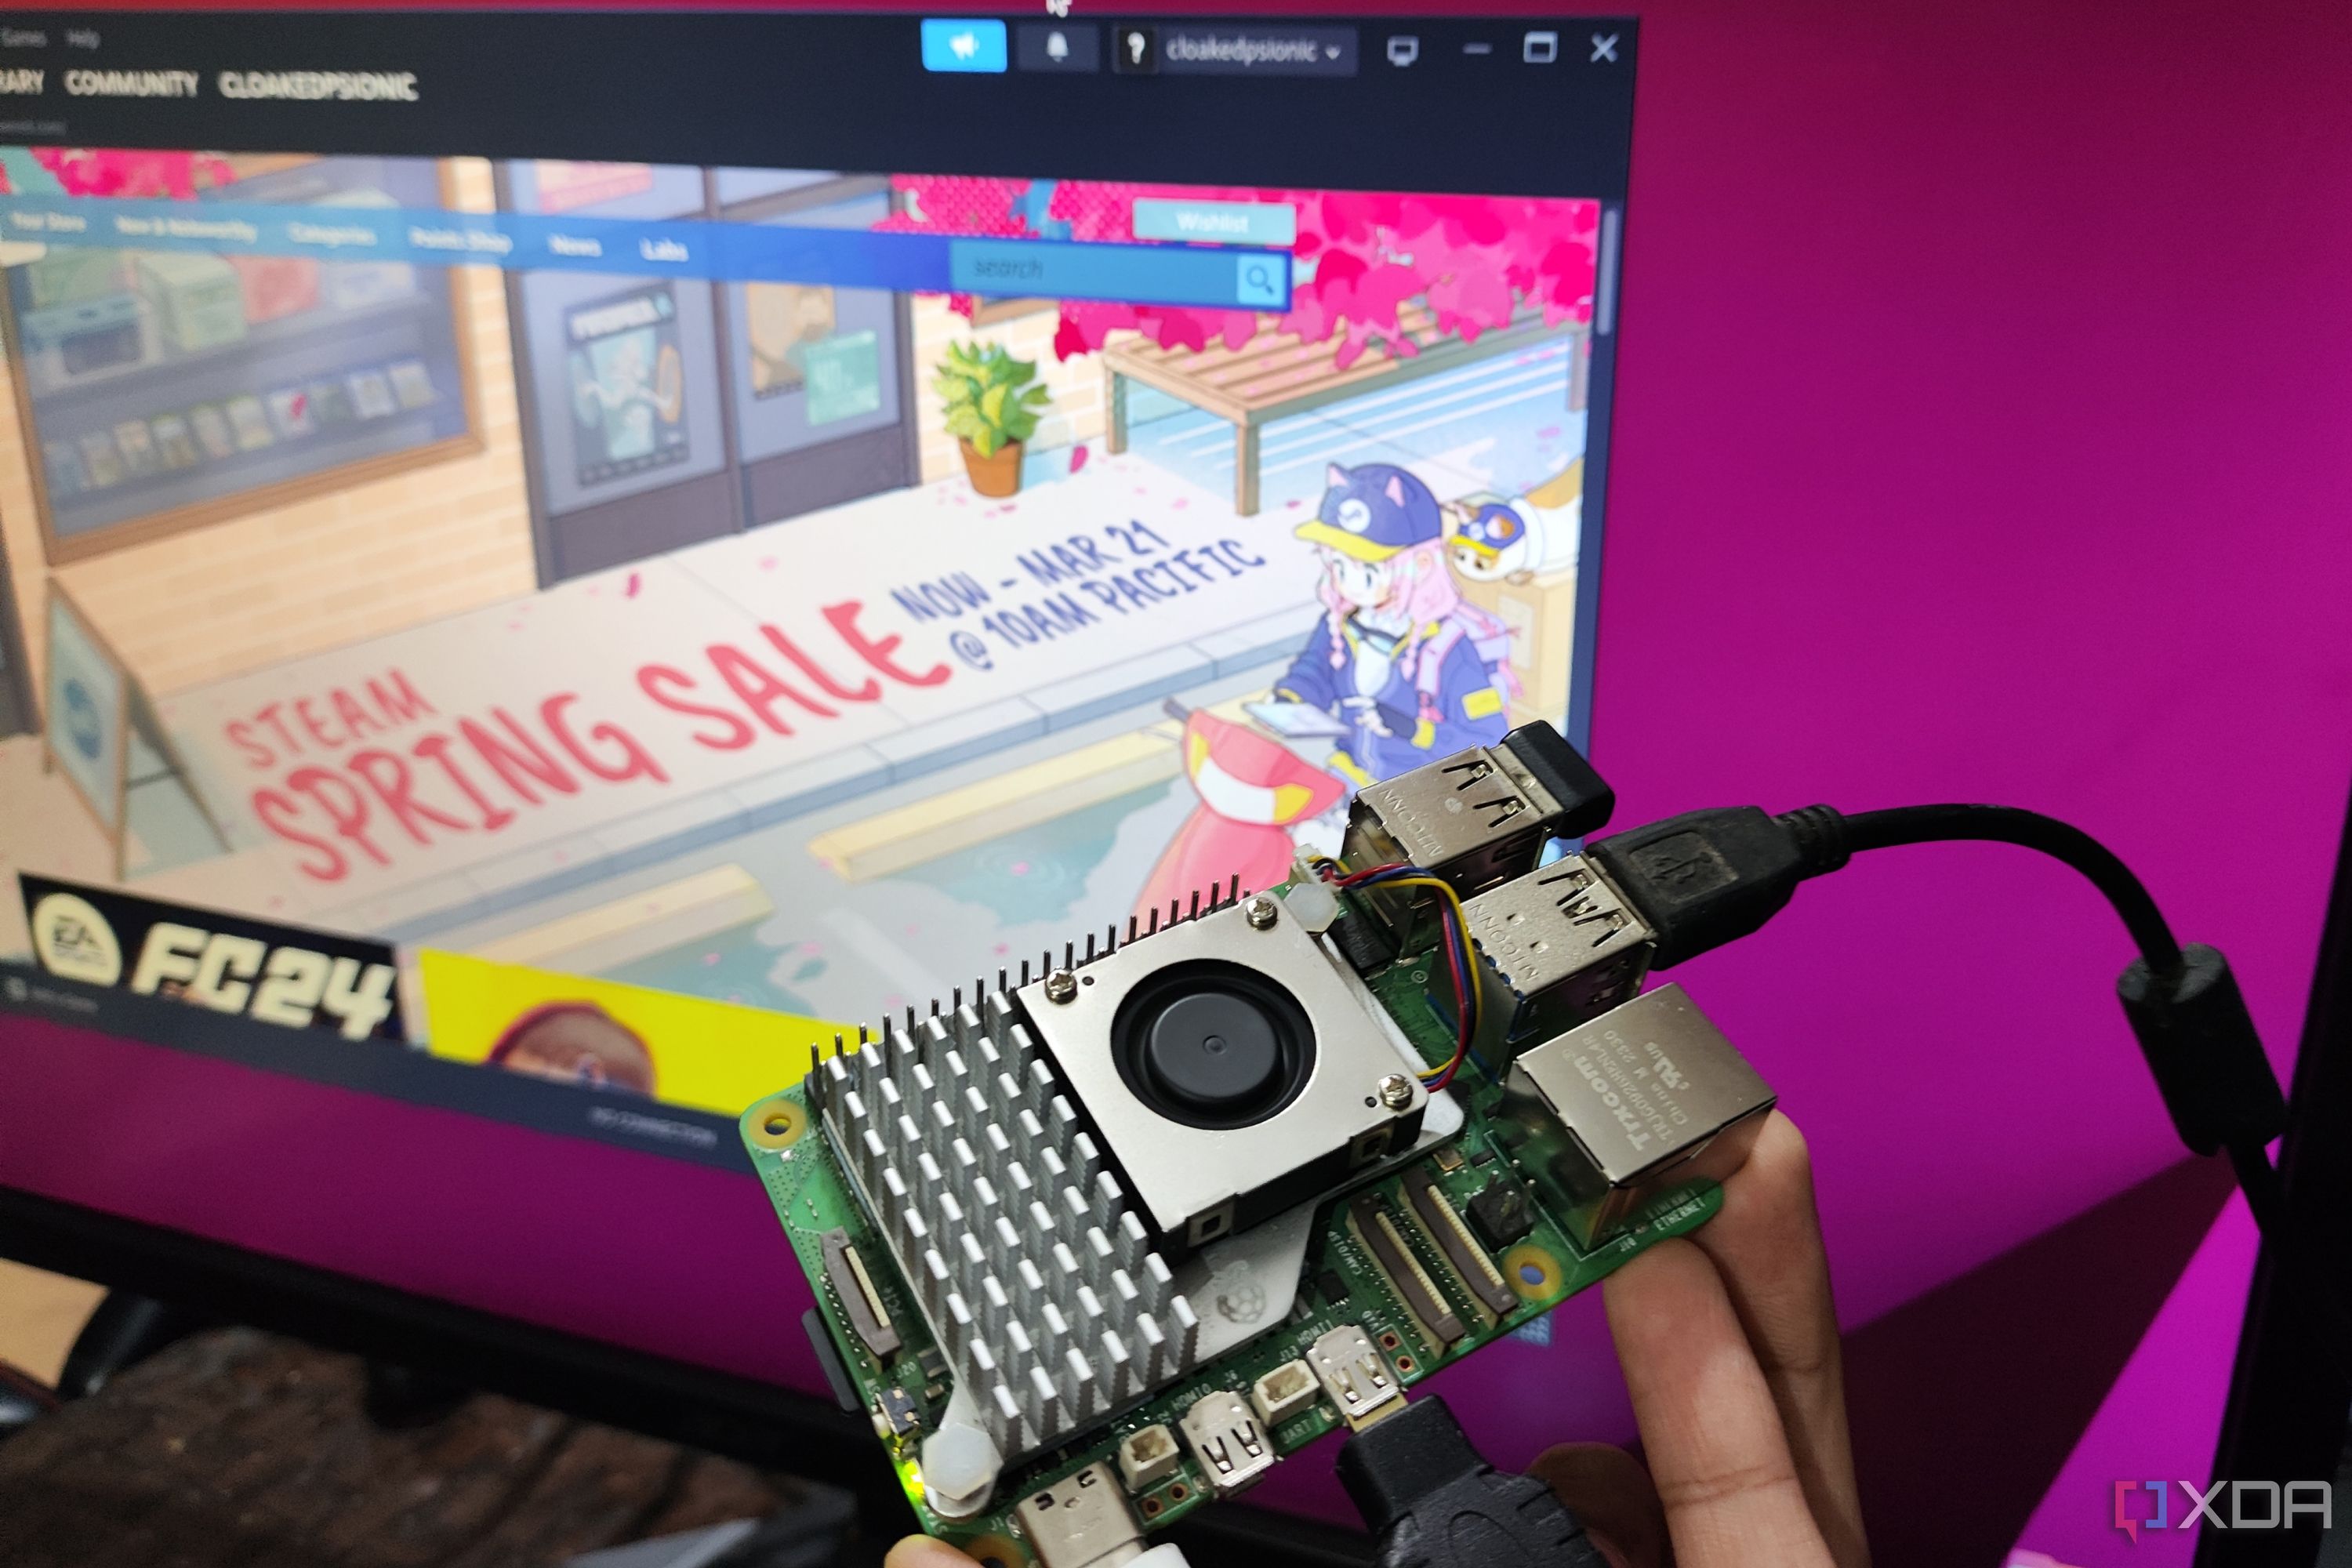 This YouTuber shows off running Steam games on a Raspberry Pi 5